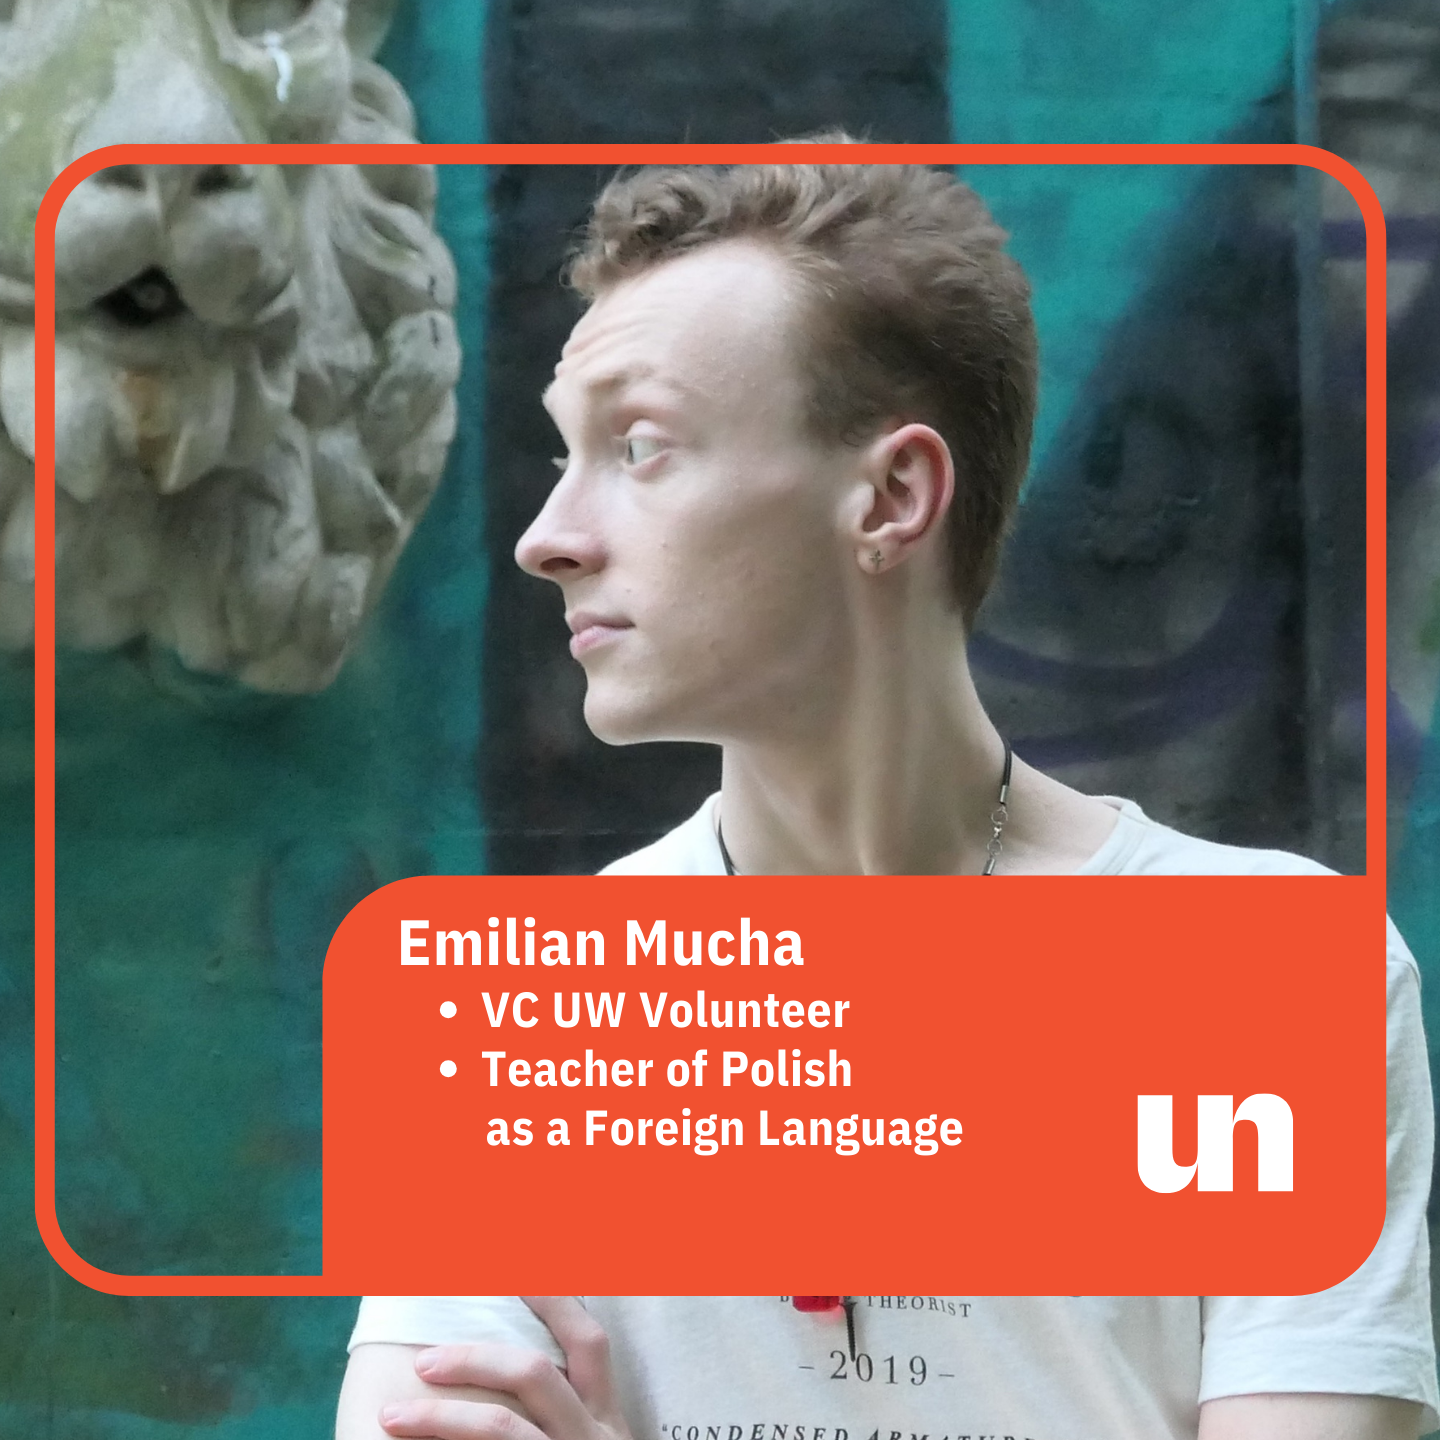 Click and get more info about Emilian Mucha